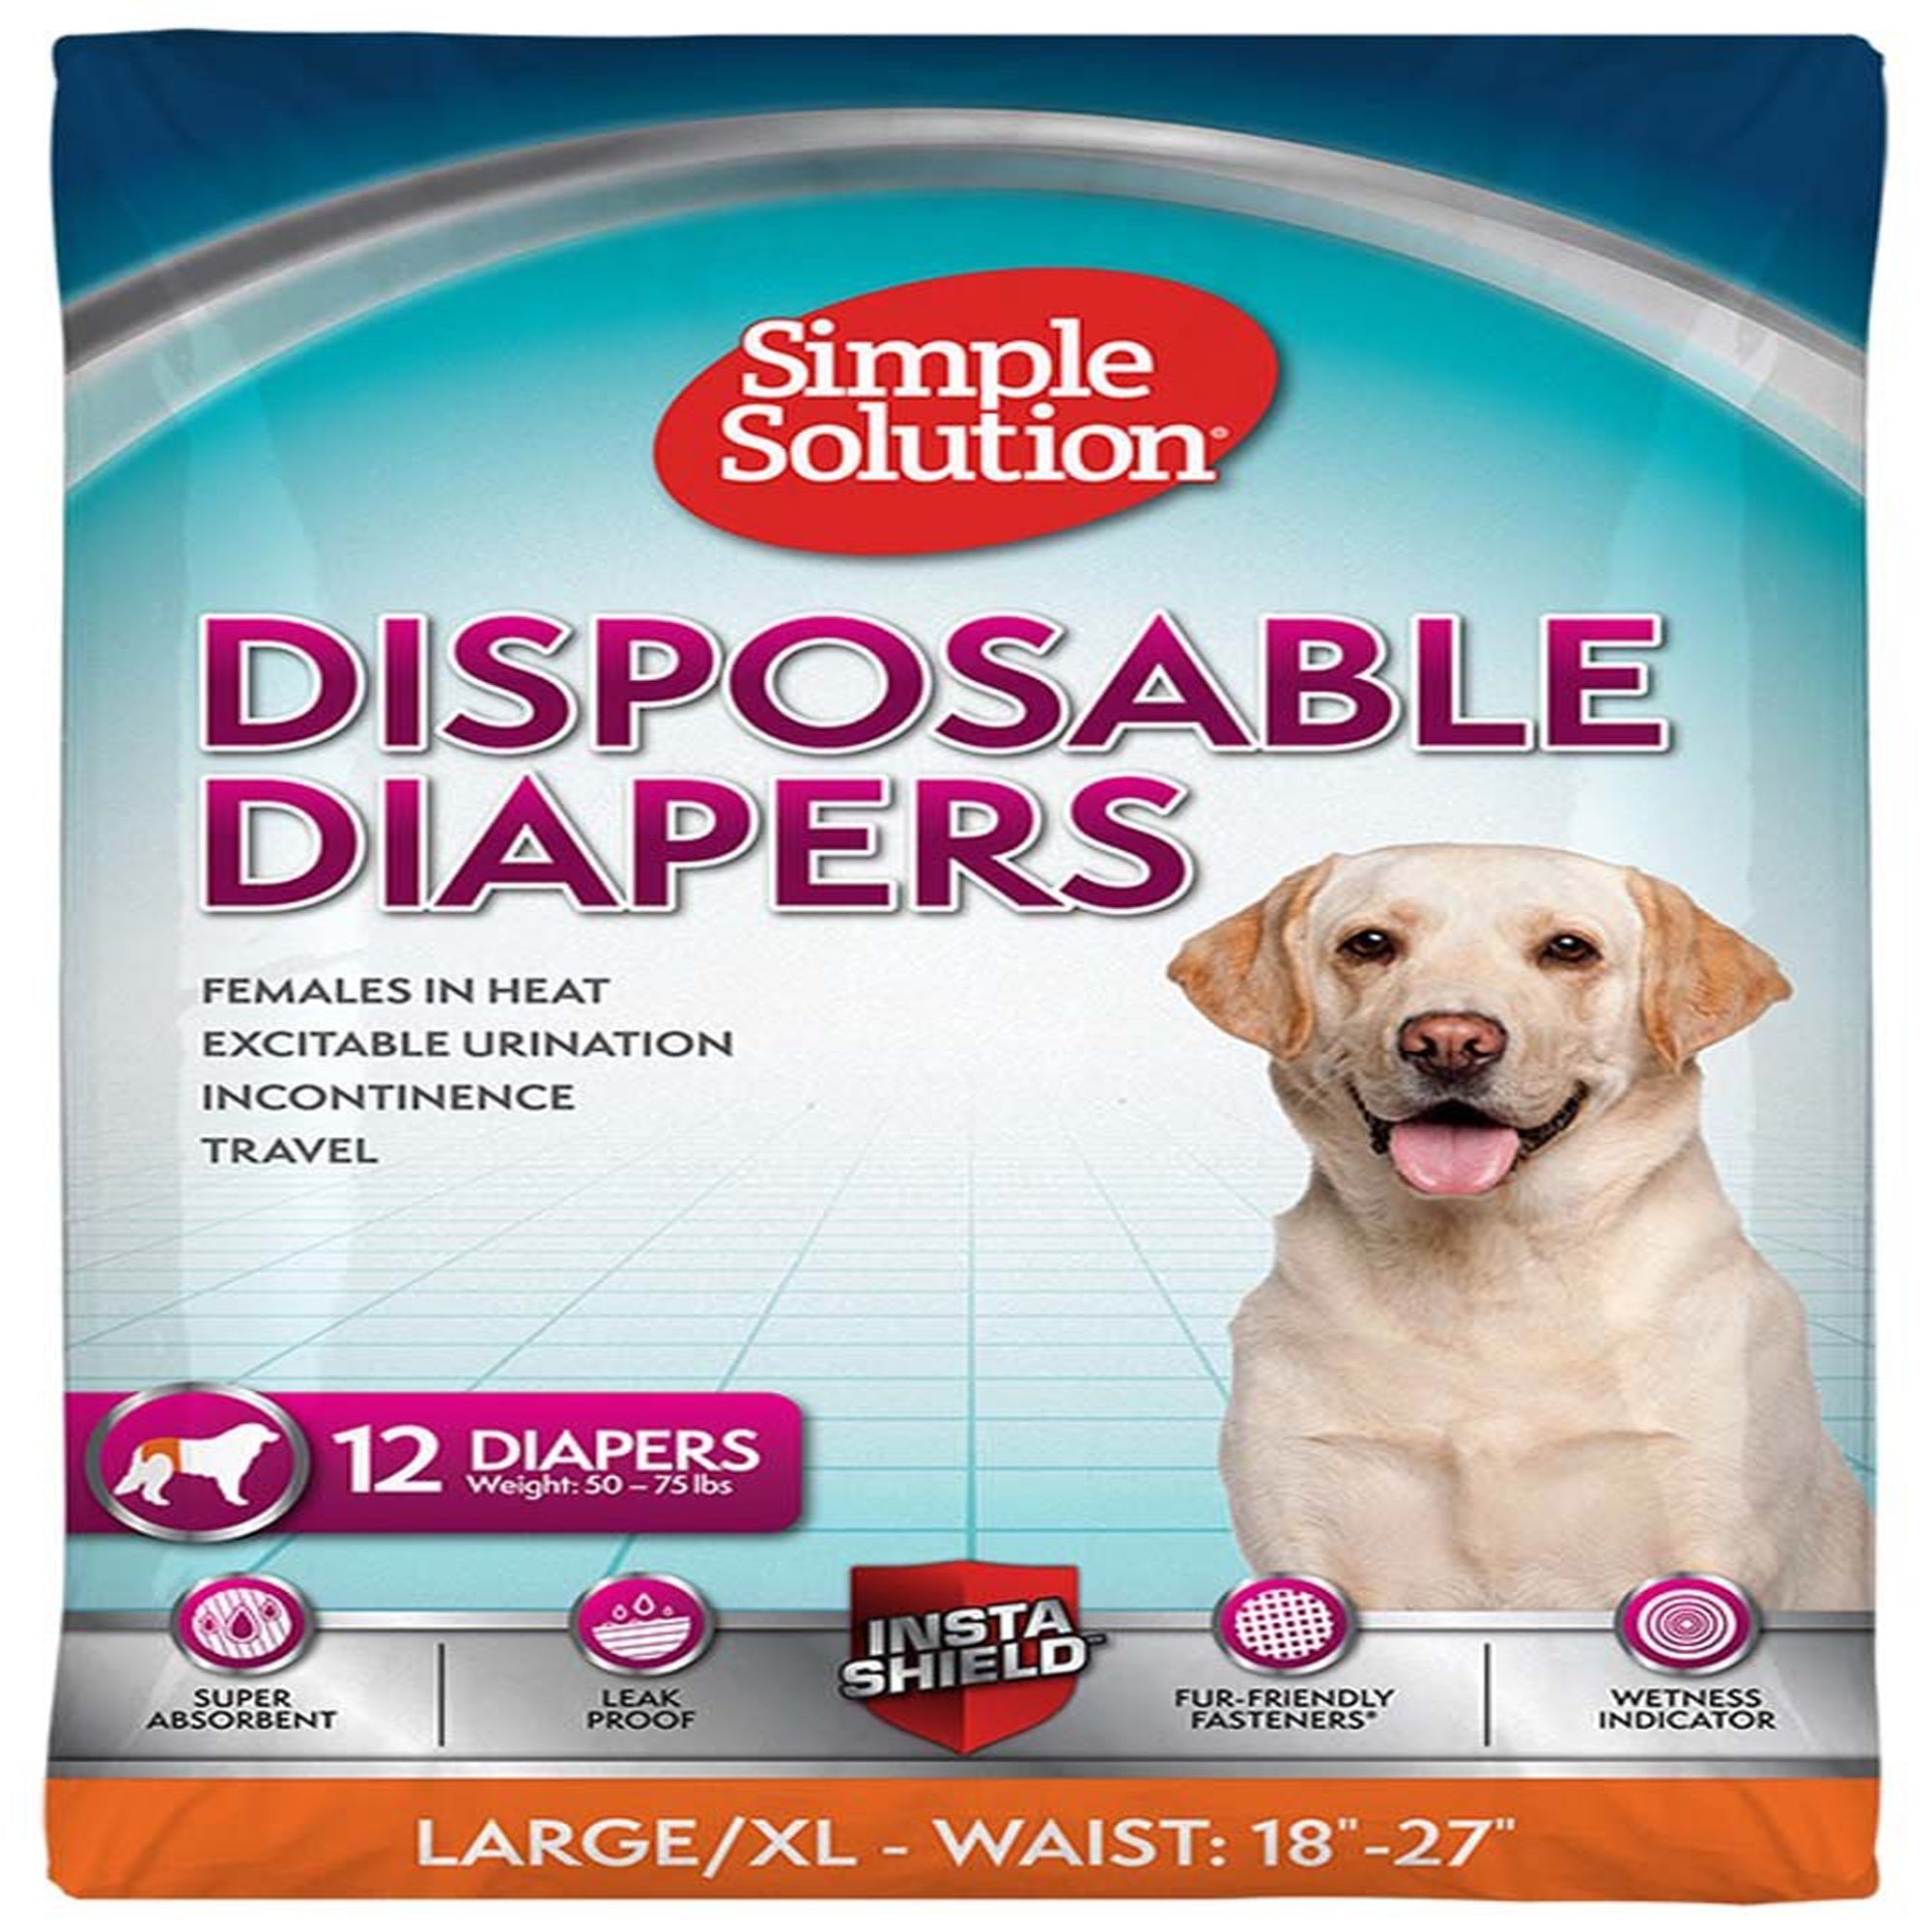 Simple Solution Disposable Diapers White 1ea/LG, 12 pk